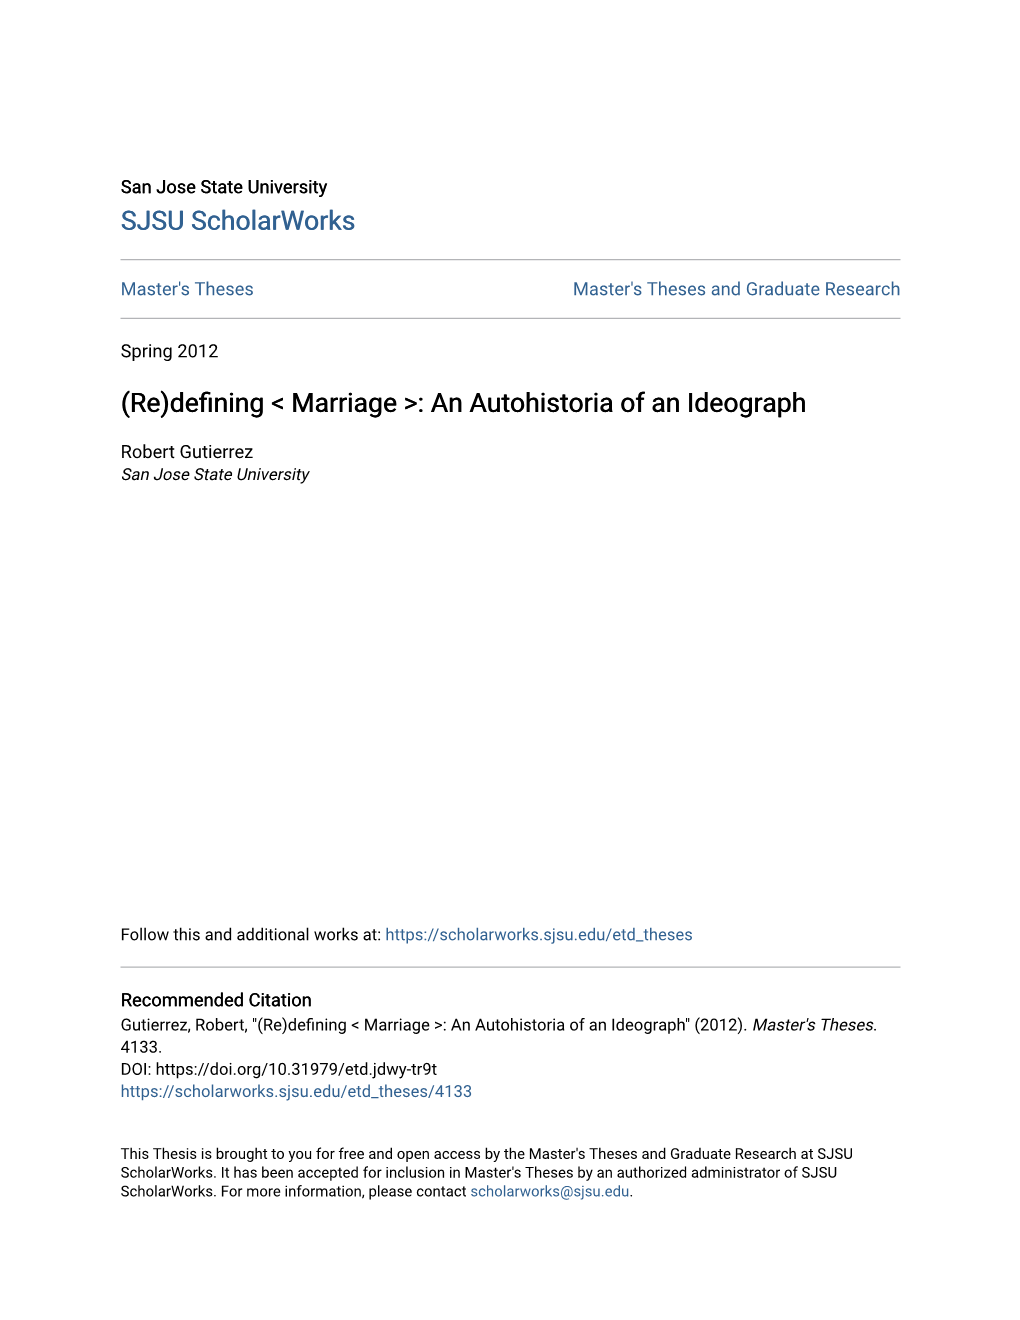 (Re)Defining &lt; Marriage &gt;: an Autohistoria of an Ideograph